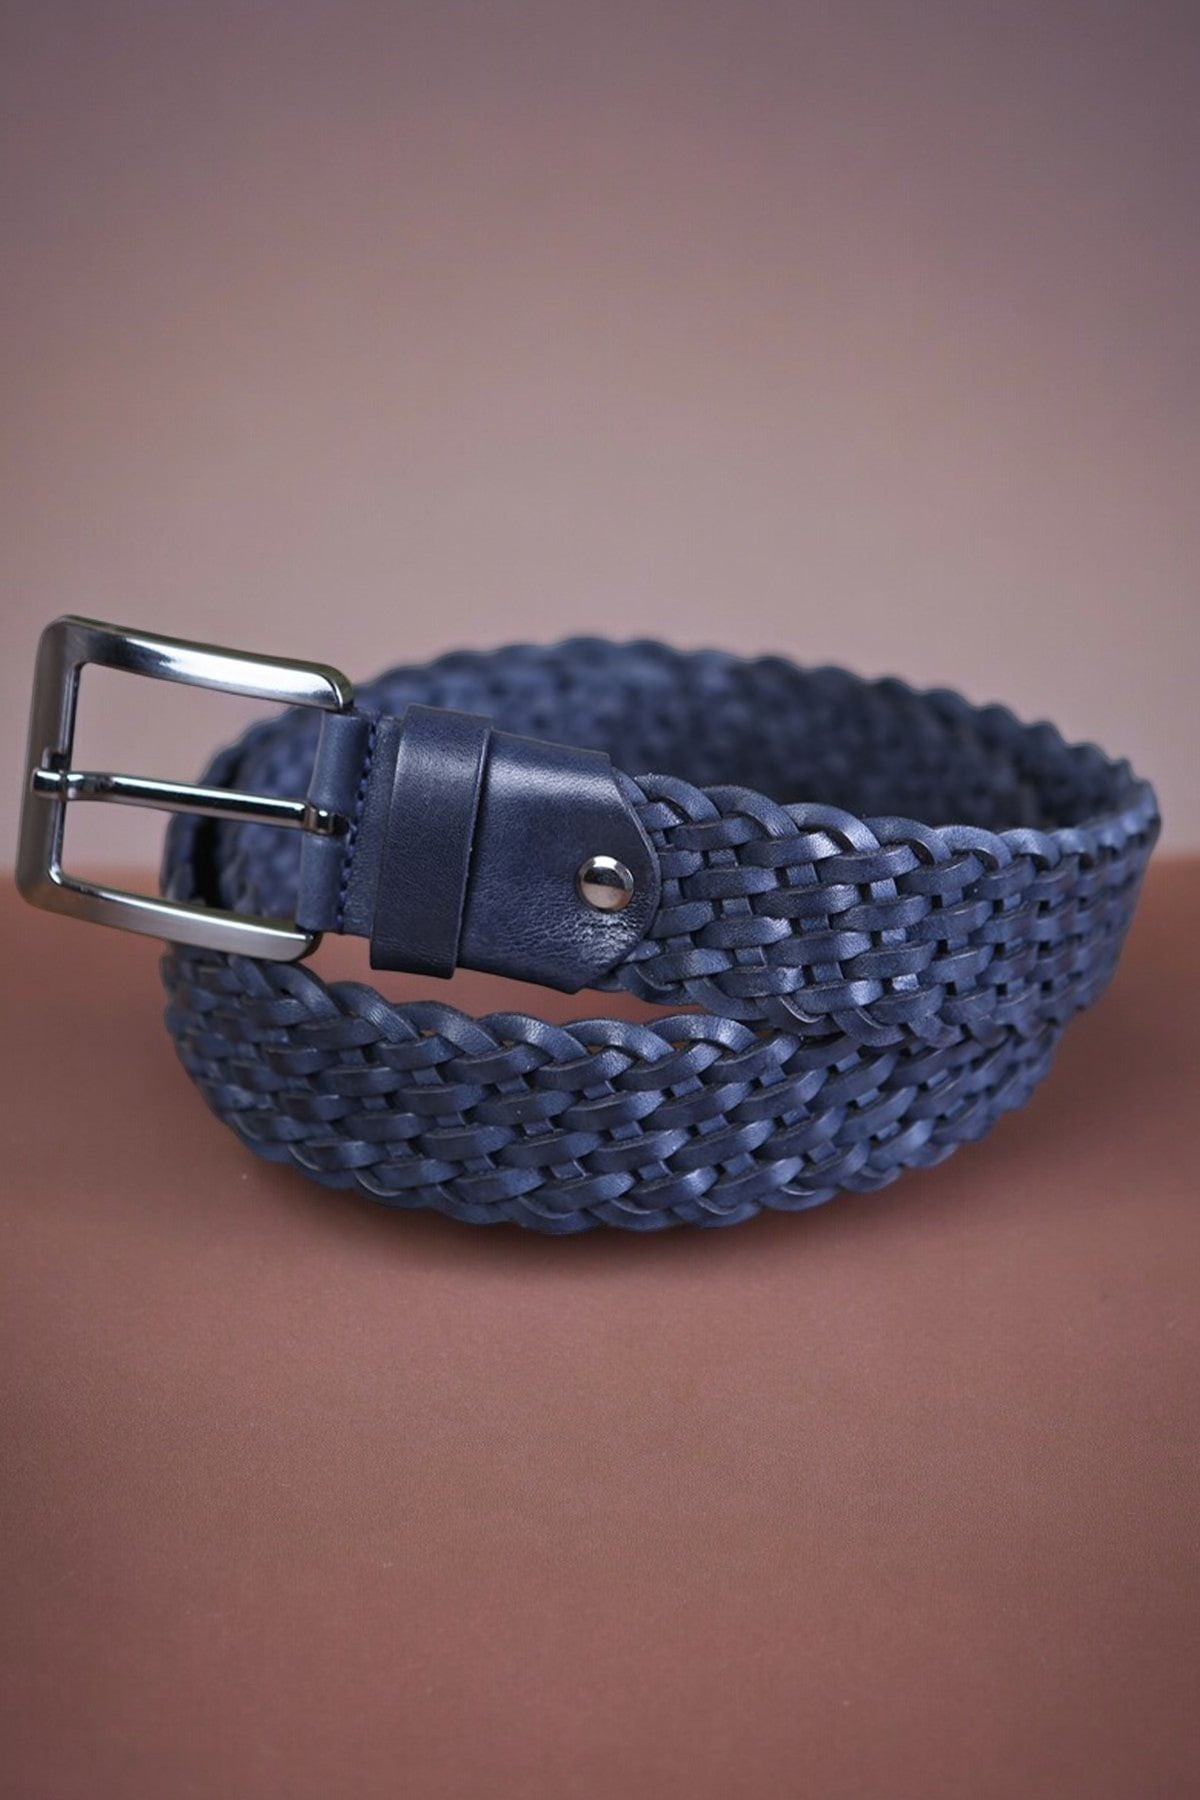 Hand Knitted Leather Belt with Different Color Options  99percenthandmade   